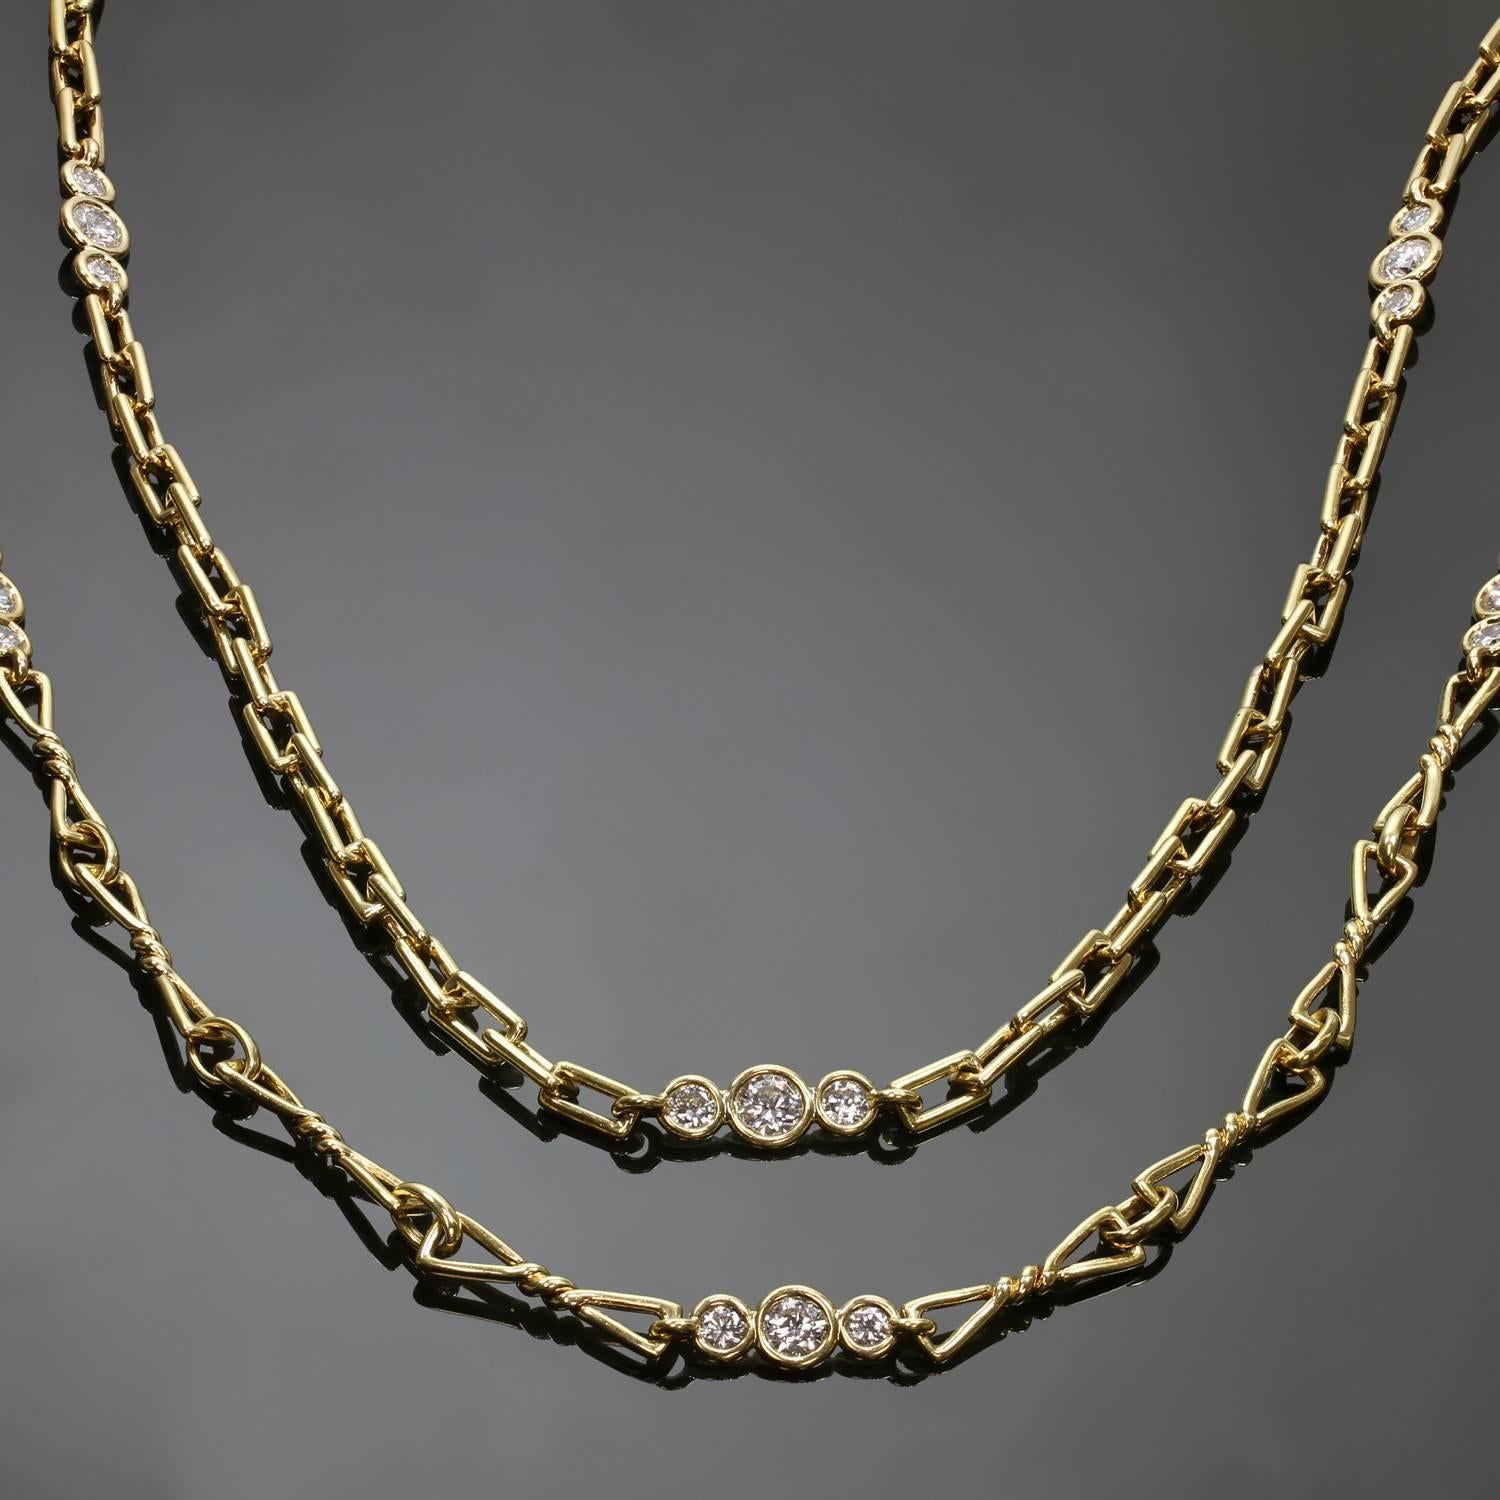 This chic and rare pair of long David Webb chains features a multi-shaped link design crafted in 18k yellow gold and accented with brilliant-cut round diamonds of an estimated 5.0 carats. Made in United States circa 1990s. Measurements: 28